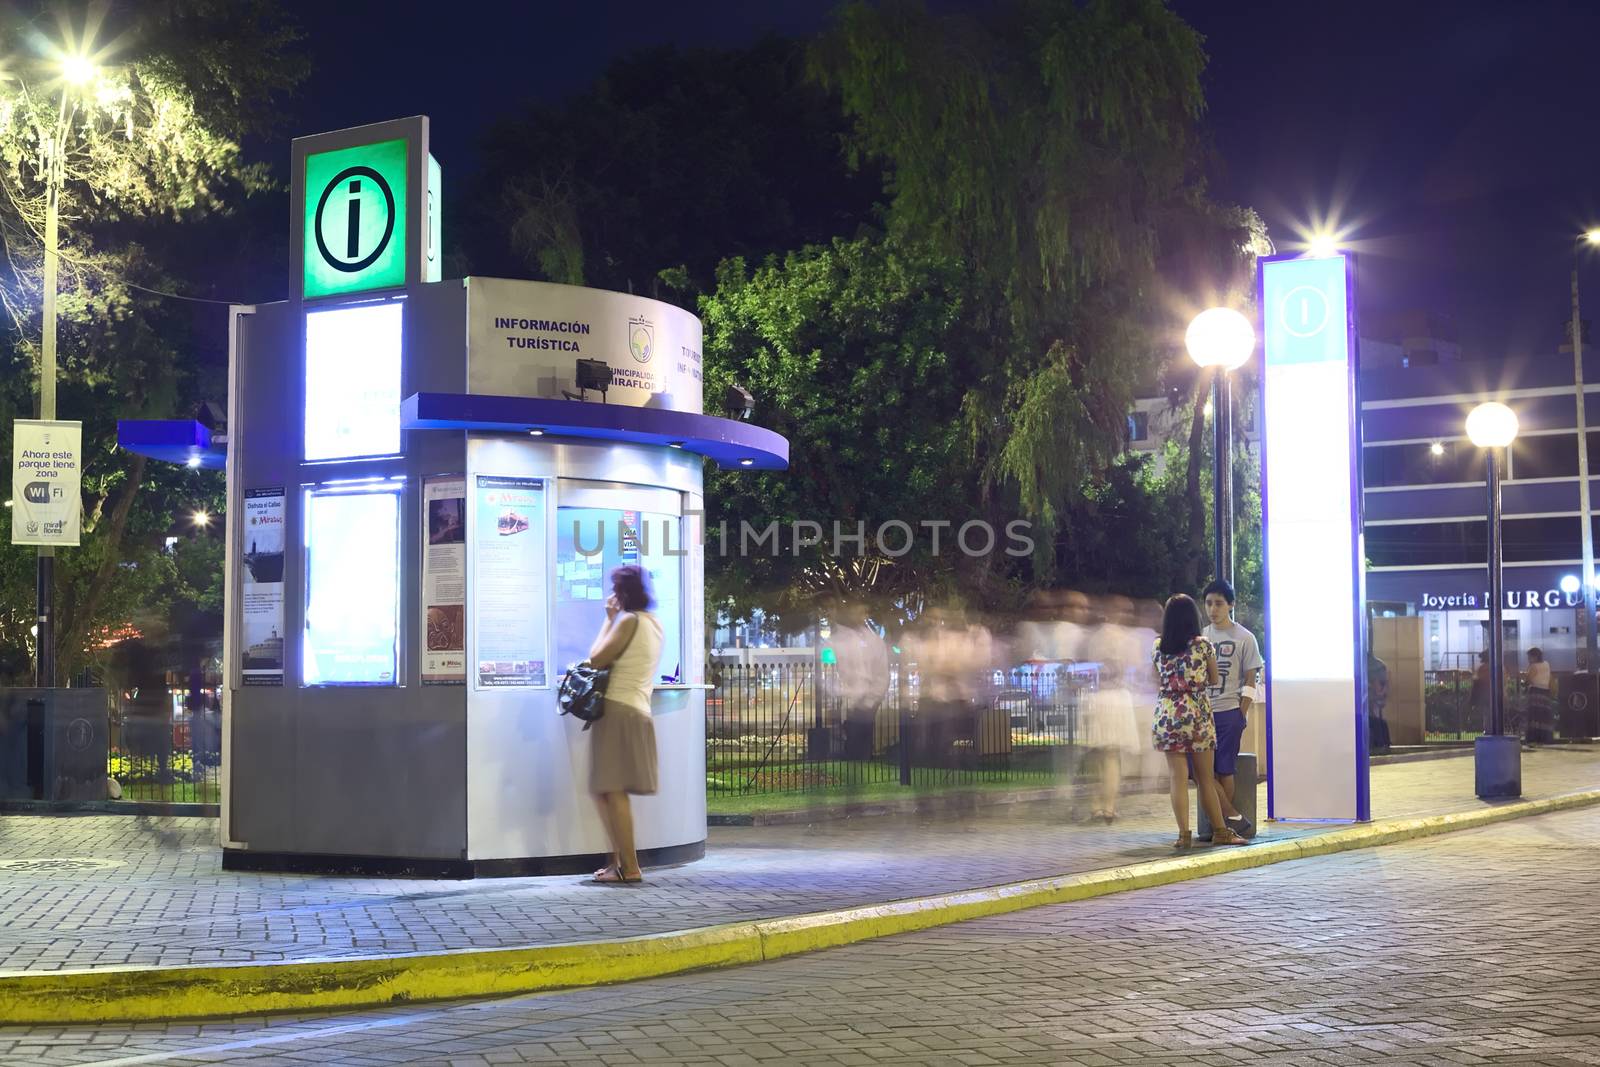 LIMA, PERU - MARCH 5, 2012: Unidentified person at the tourist information at Kennedy Park in the district of Miraflores in the evening on March 5, 2012 in Lima, Peru. Miraflores is the most touristy district of Lima, which has the most infrastructure for tourism.  